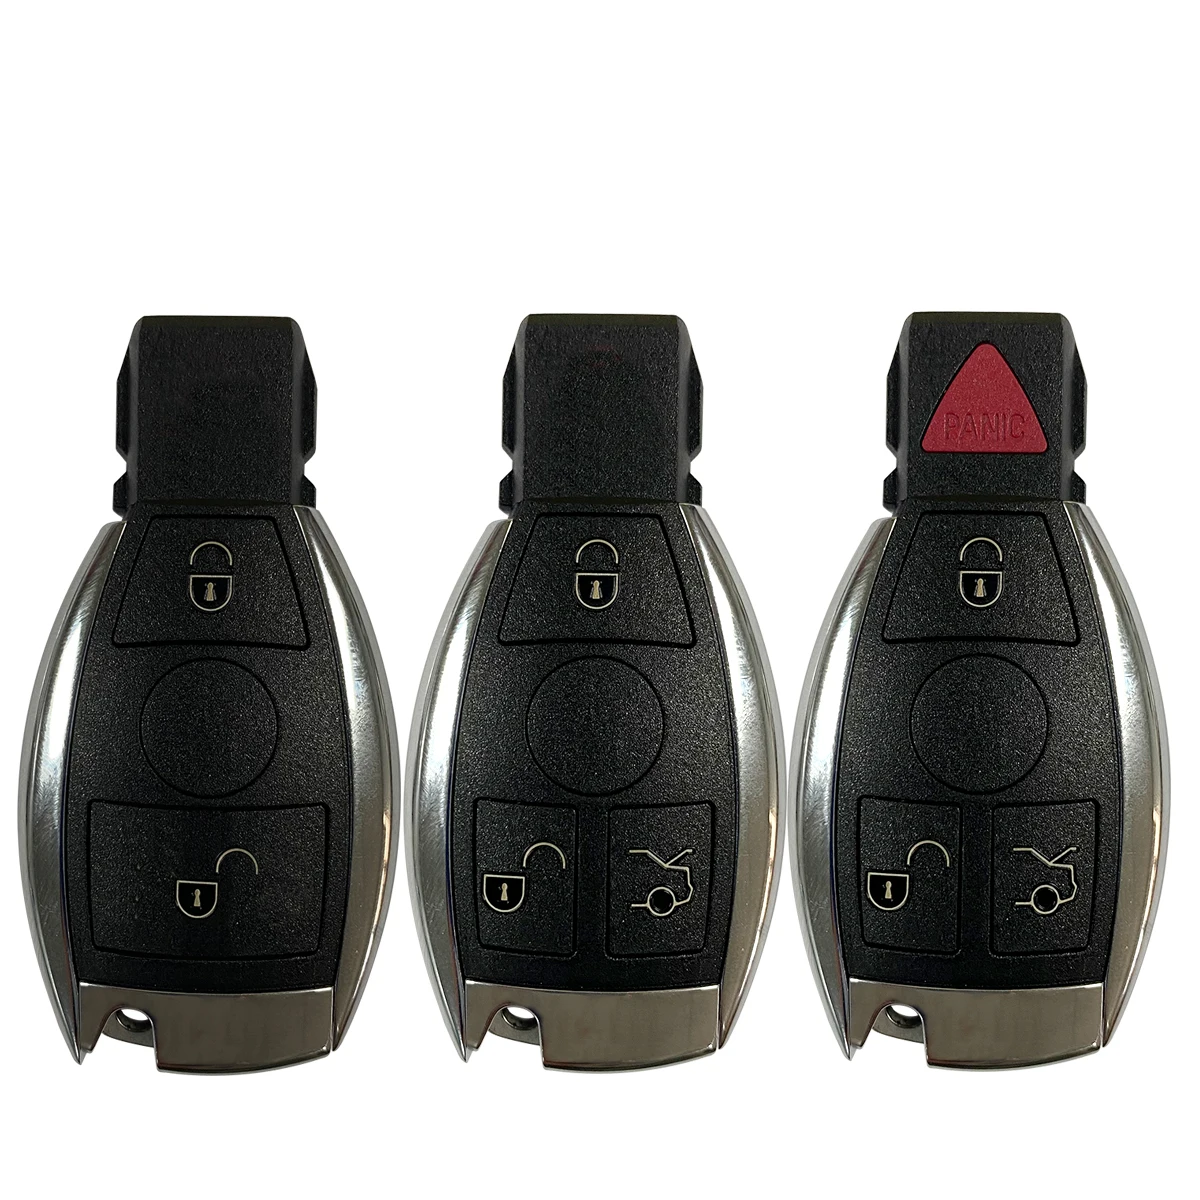 Okey Remote Control Car Key Shell Replacement  For Mercedes Benz Year 2000+ C E S Class Supports Original NEC/BGA  2/3/4 Buttons best key car accessoriessmart remote key shell fob for mercedes benz year 2000 nec and bga style 3 buttons key case